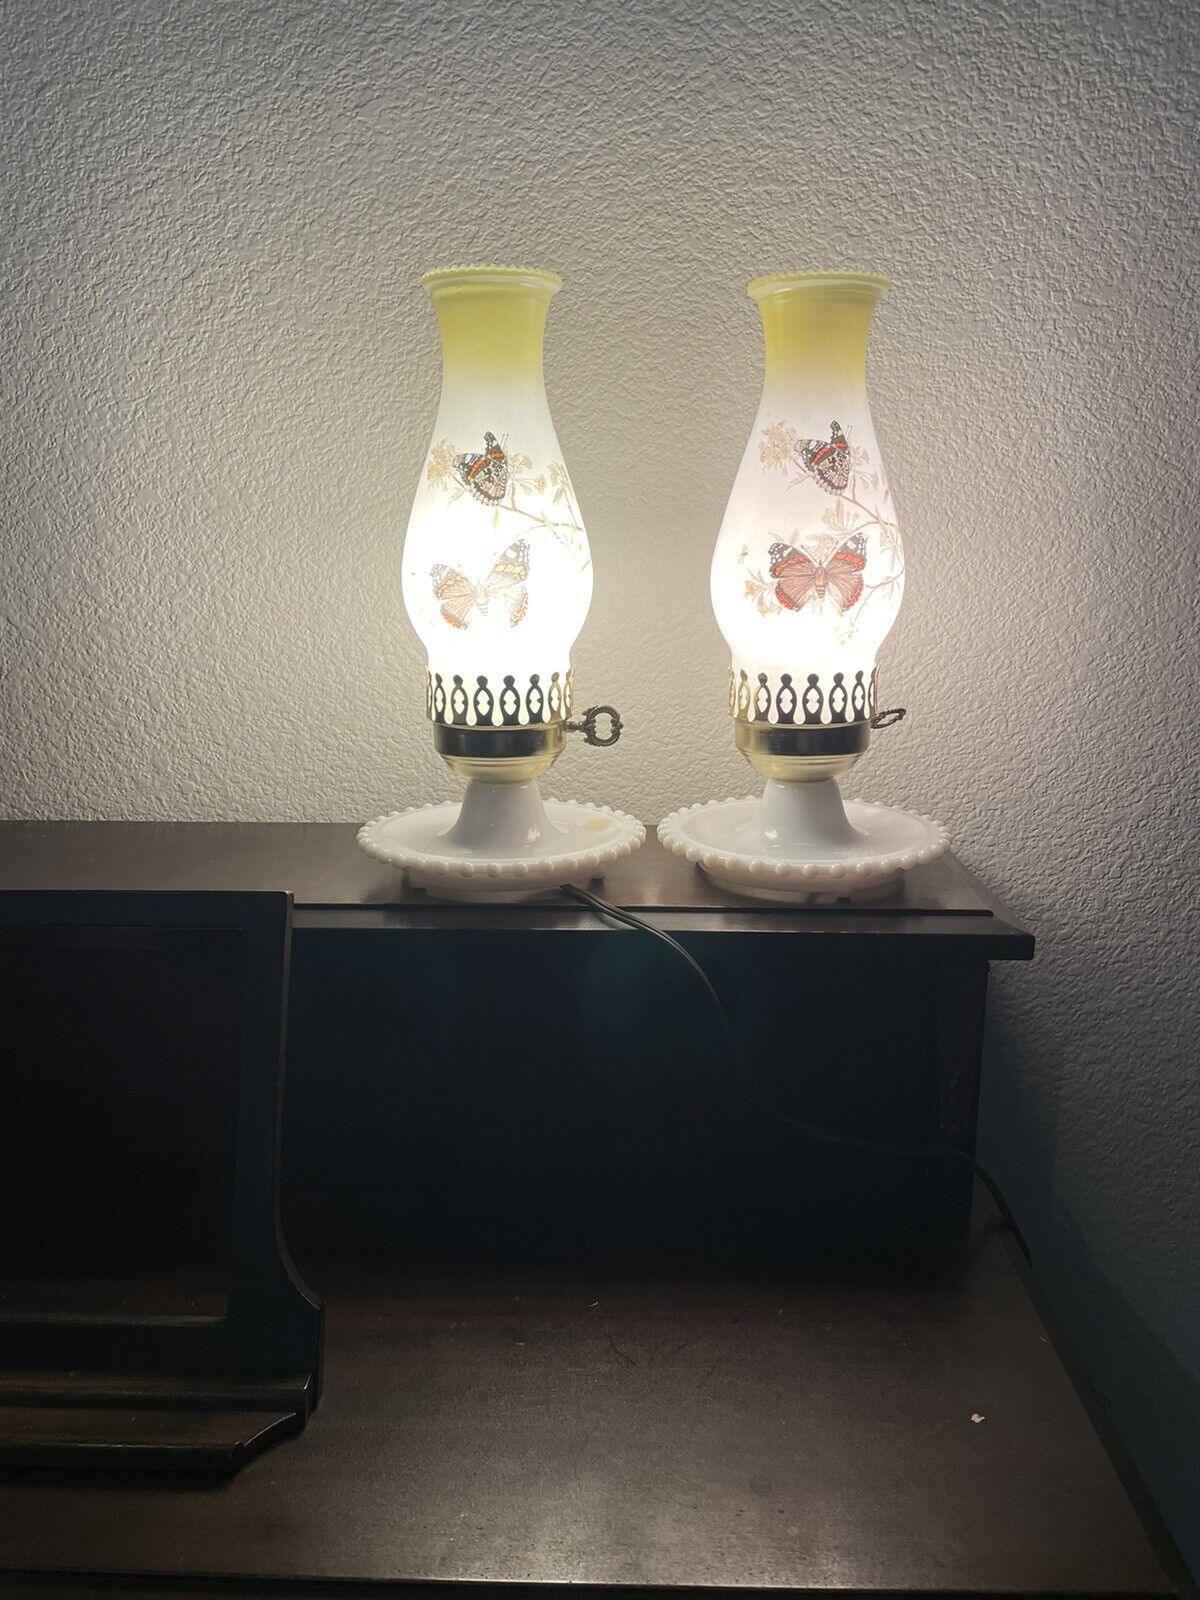 Pair Vintage Milk Glass Hurricane Lamps with Gold Flowers